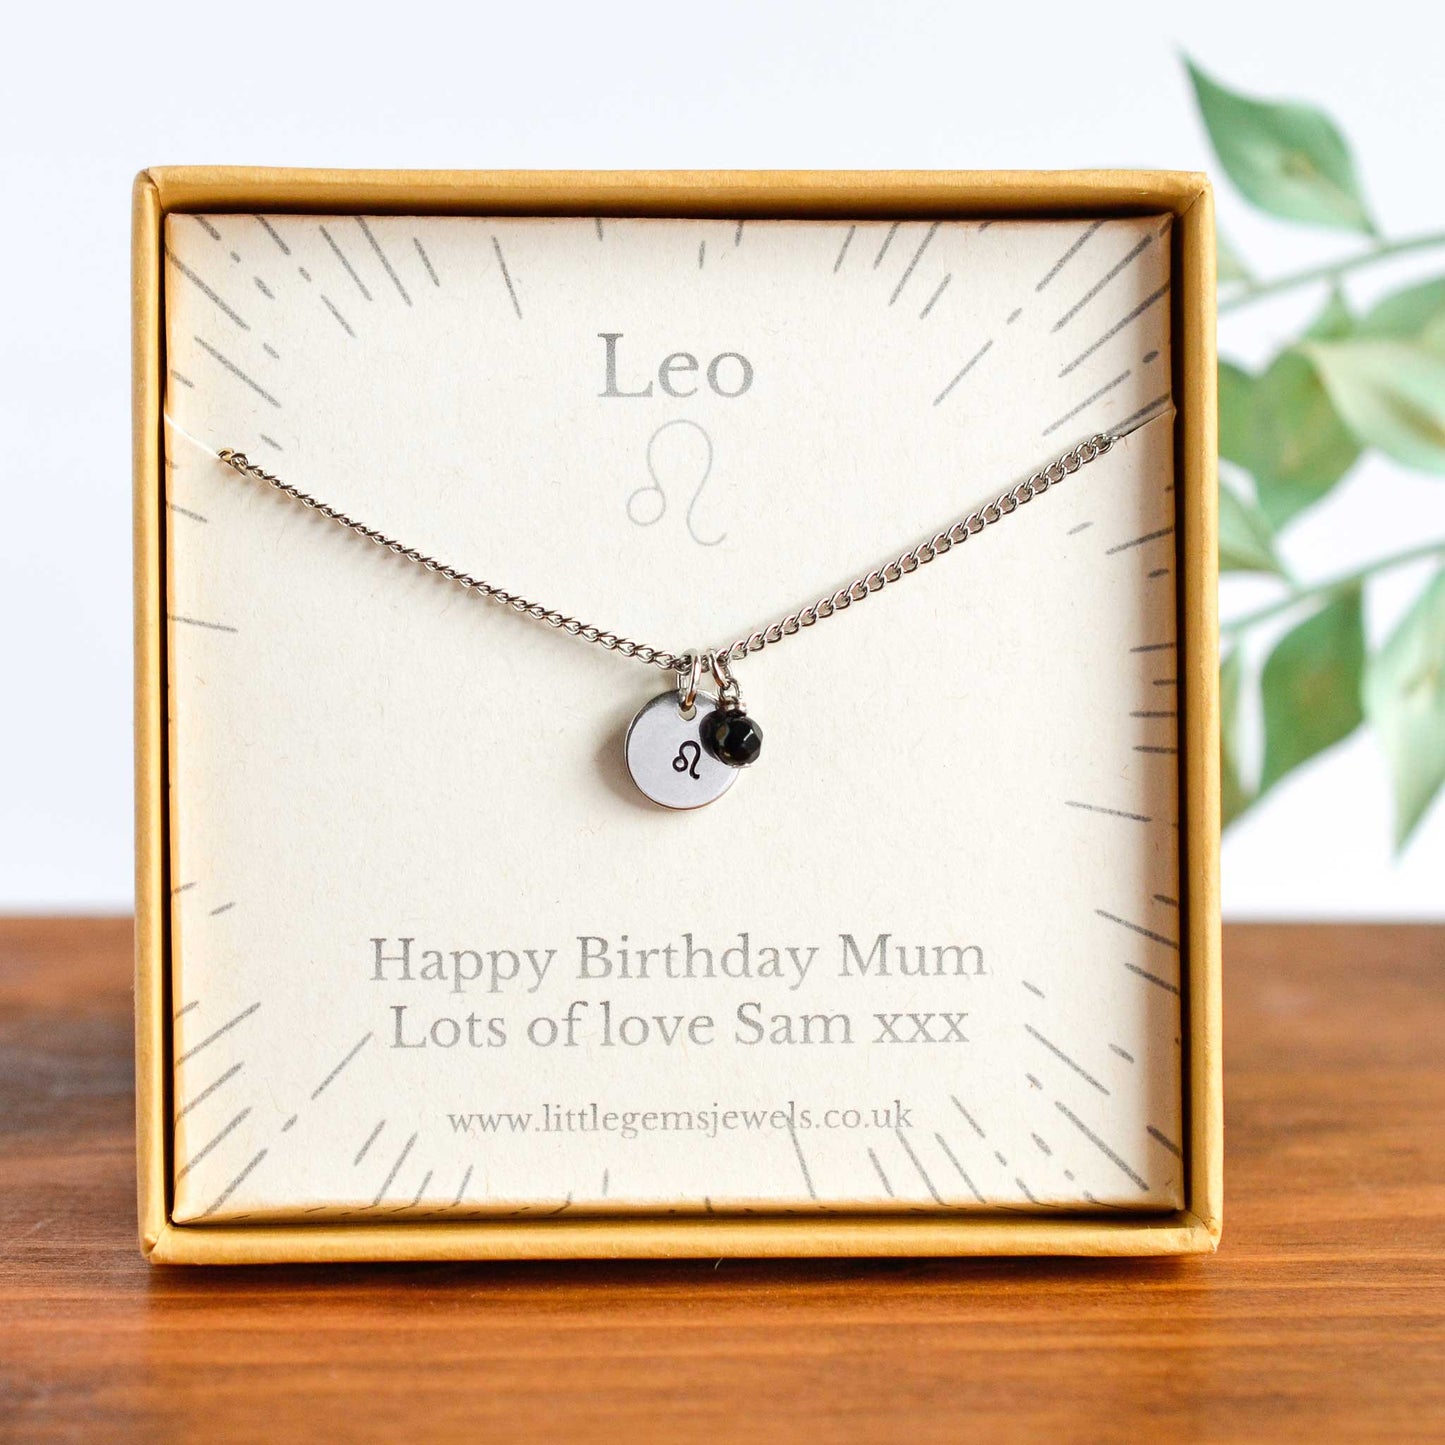 Leo Zodiac necklace with personalised gift message in eco friendly gift box